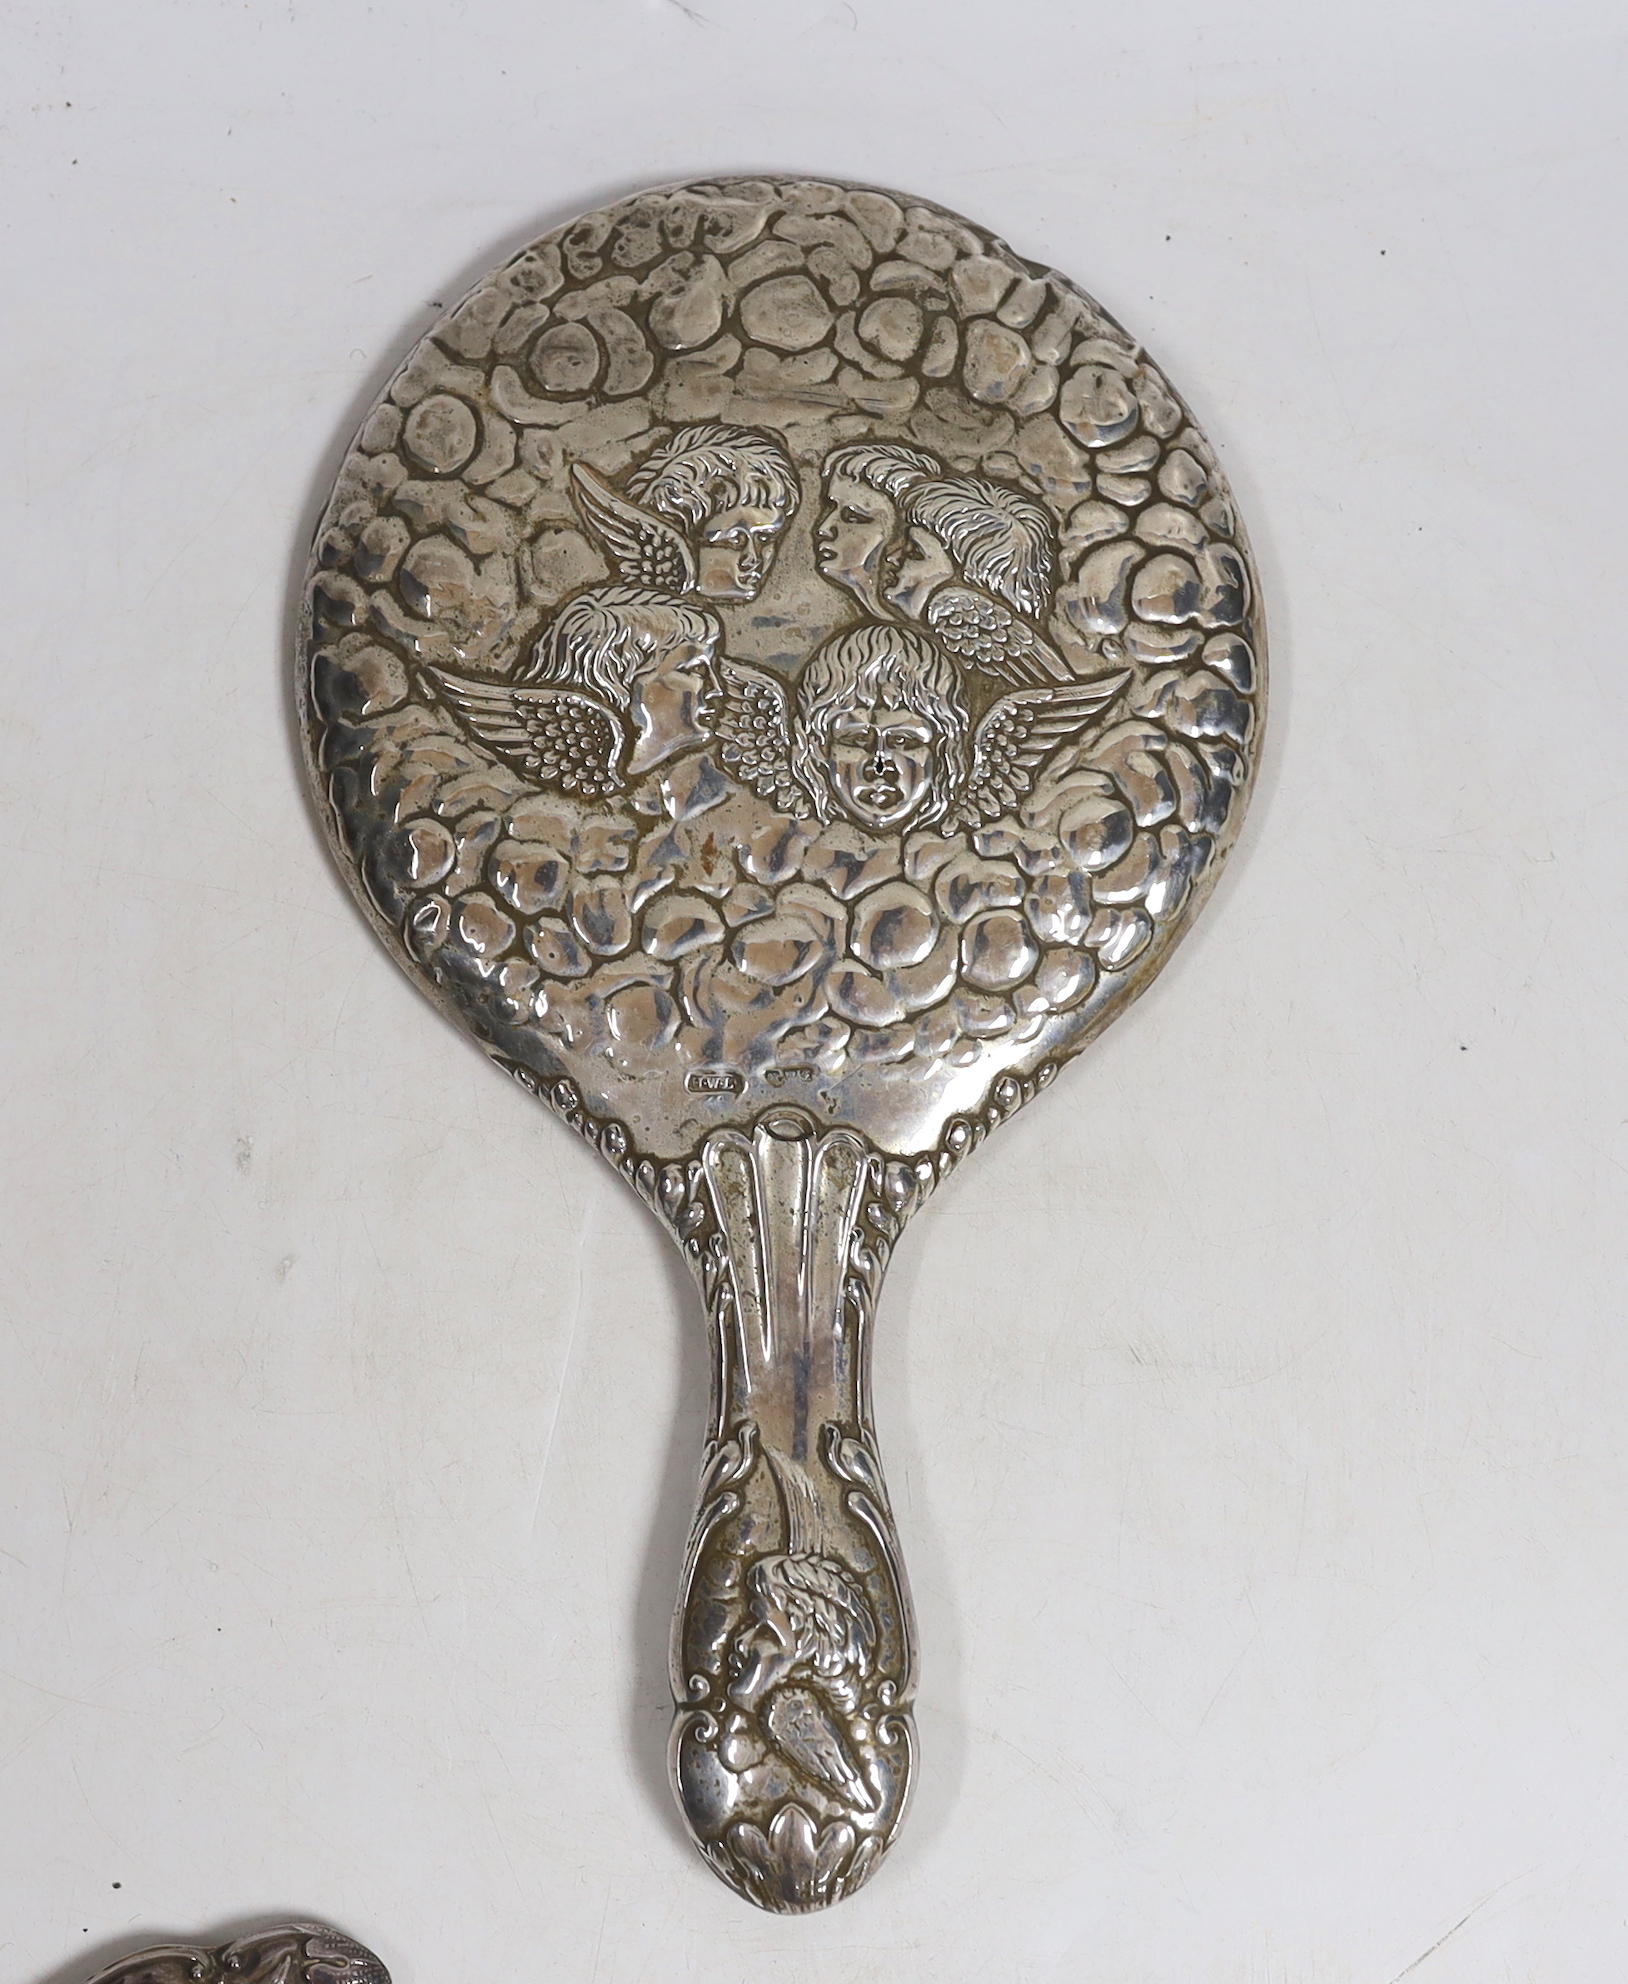 Two early 20th century repousse silver mounted hand mirrors with Reynold's Angels decoration, four silver mounted brushes and a comb.